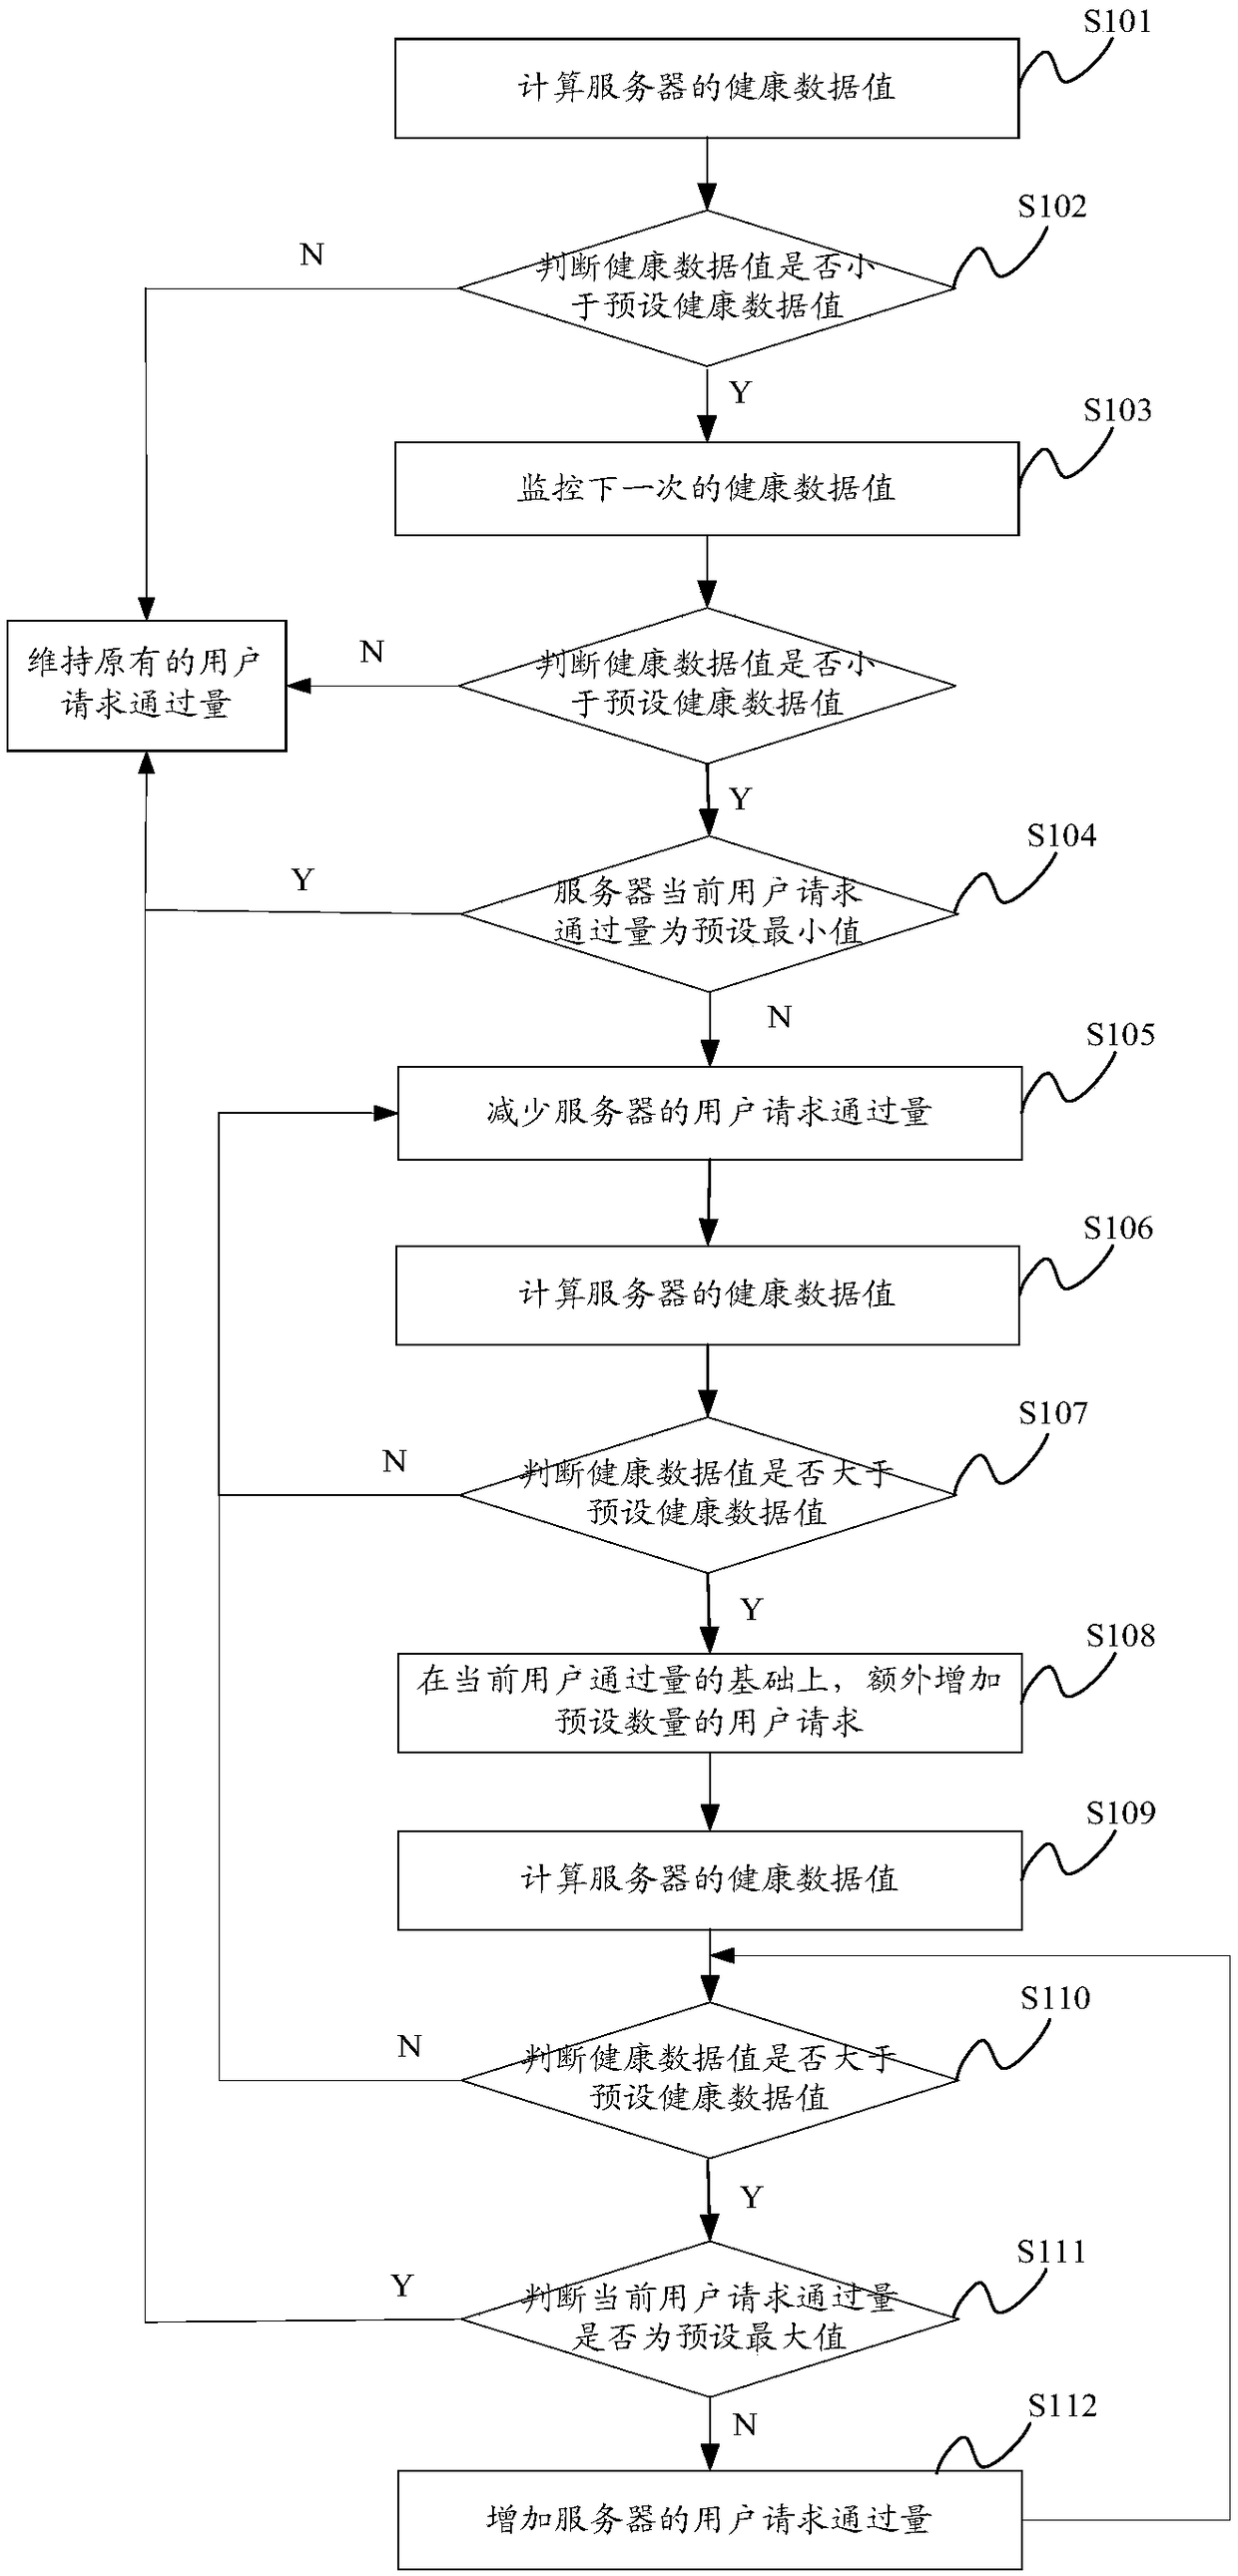 Flow control method and system